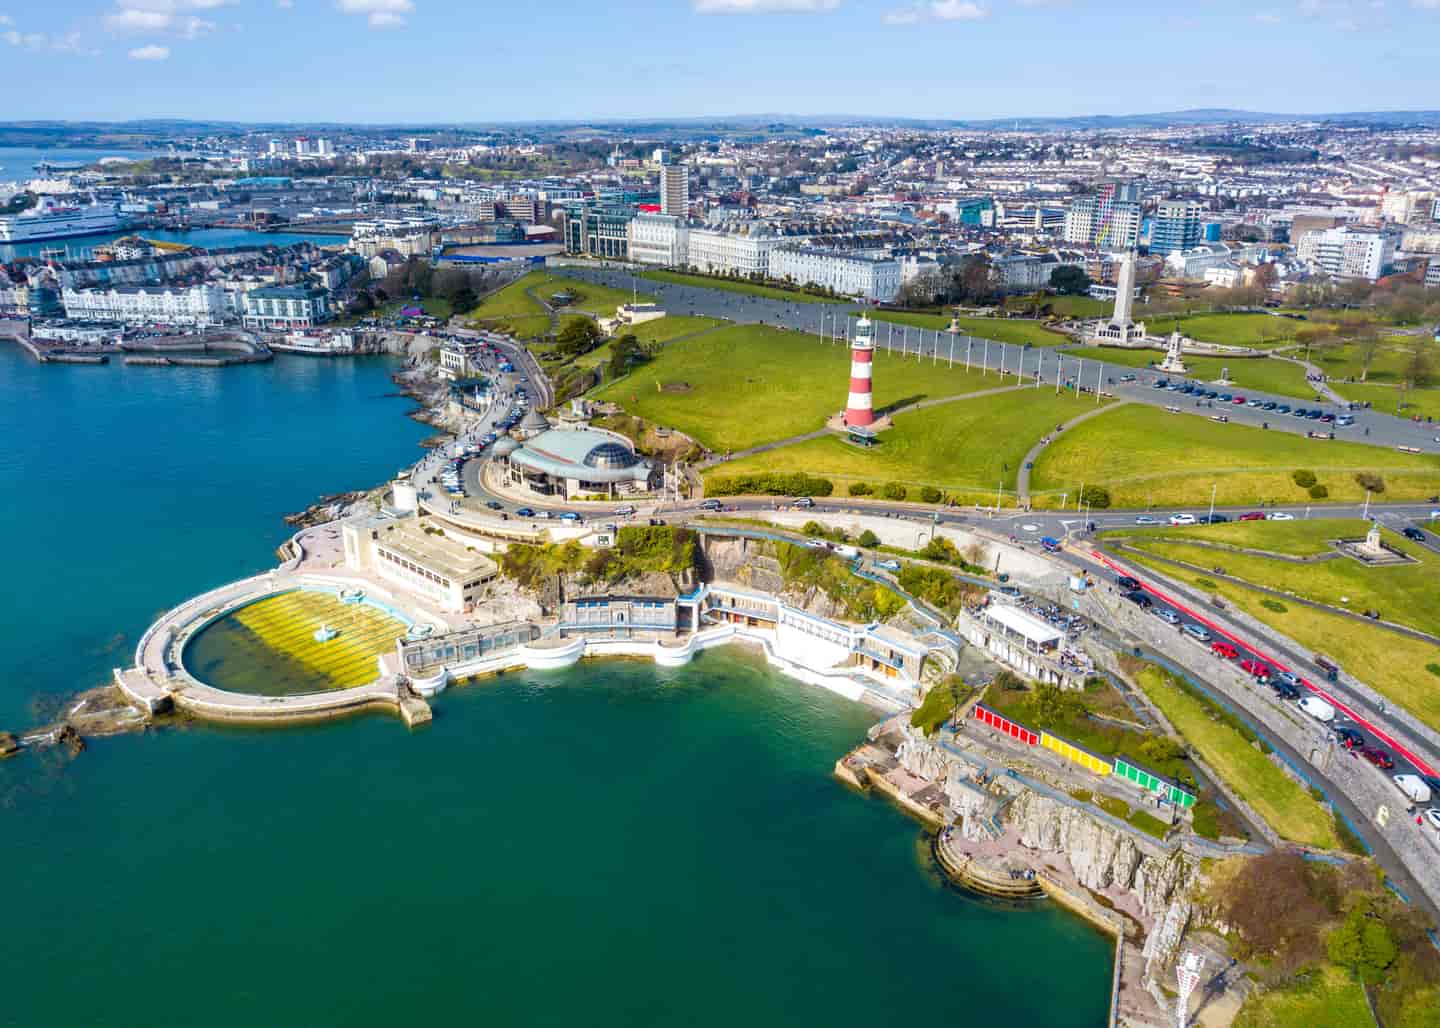 Student Accommodation in Plymouth - Arial view of Plymouth Hoe